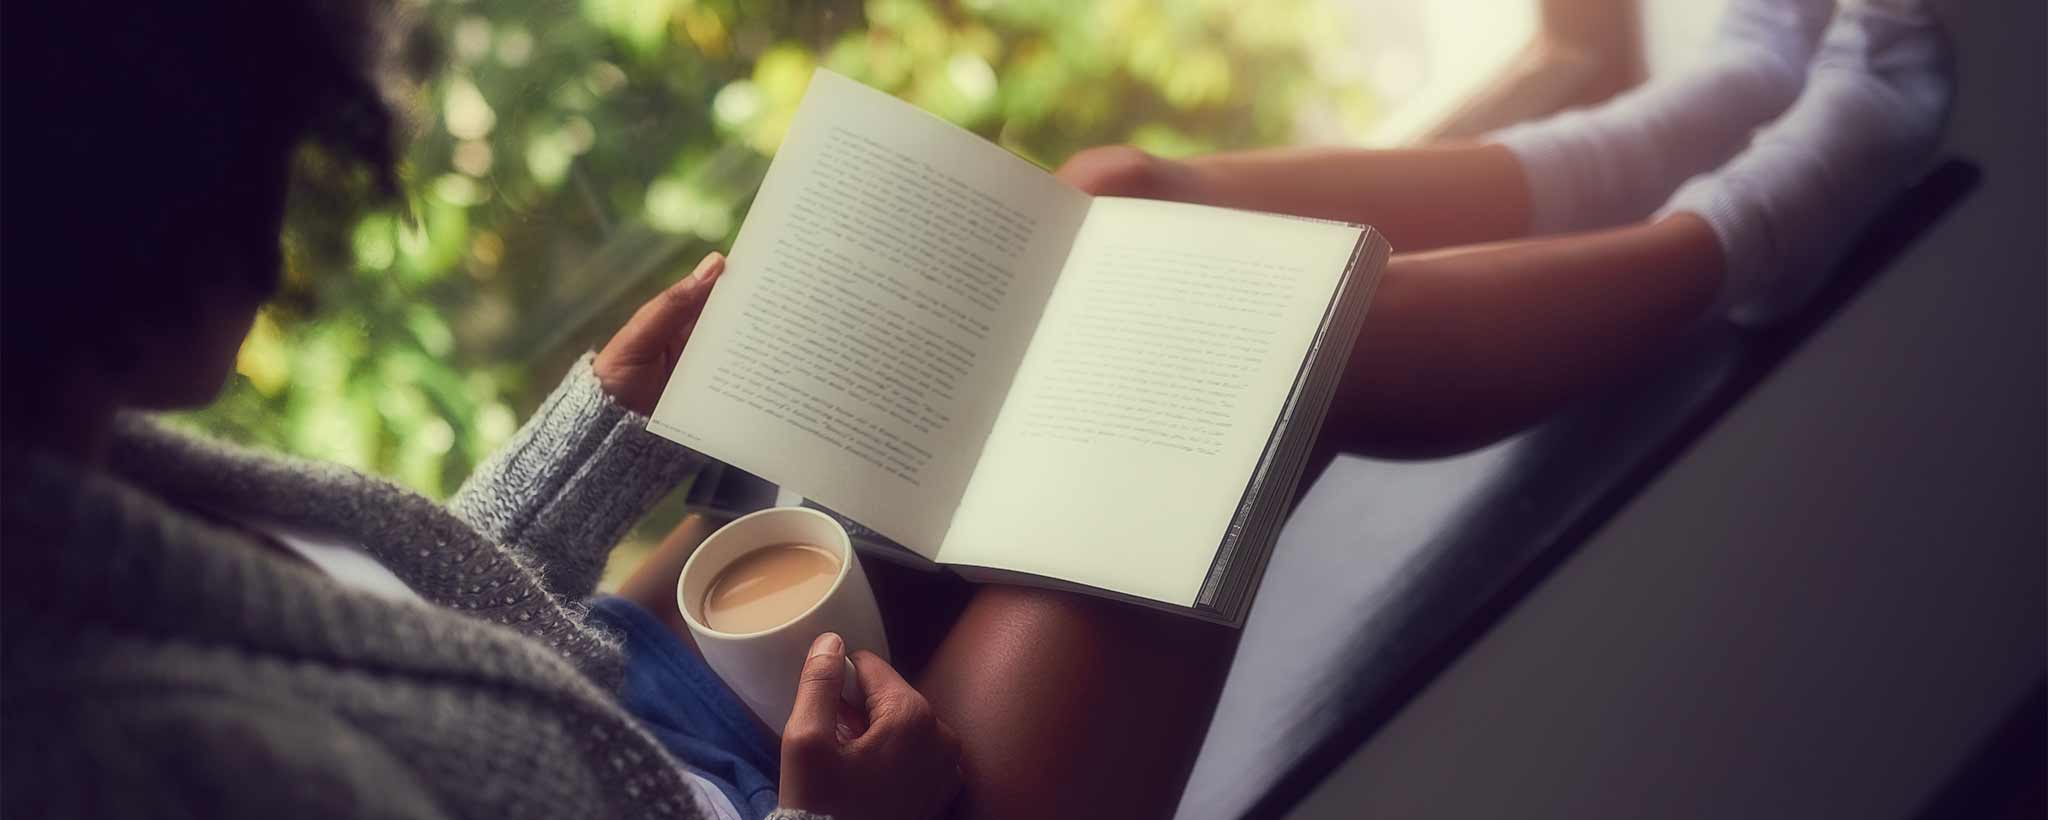 'Black woman reading book with coffee'